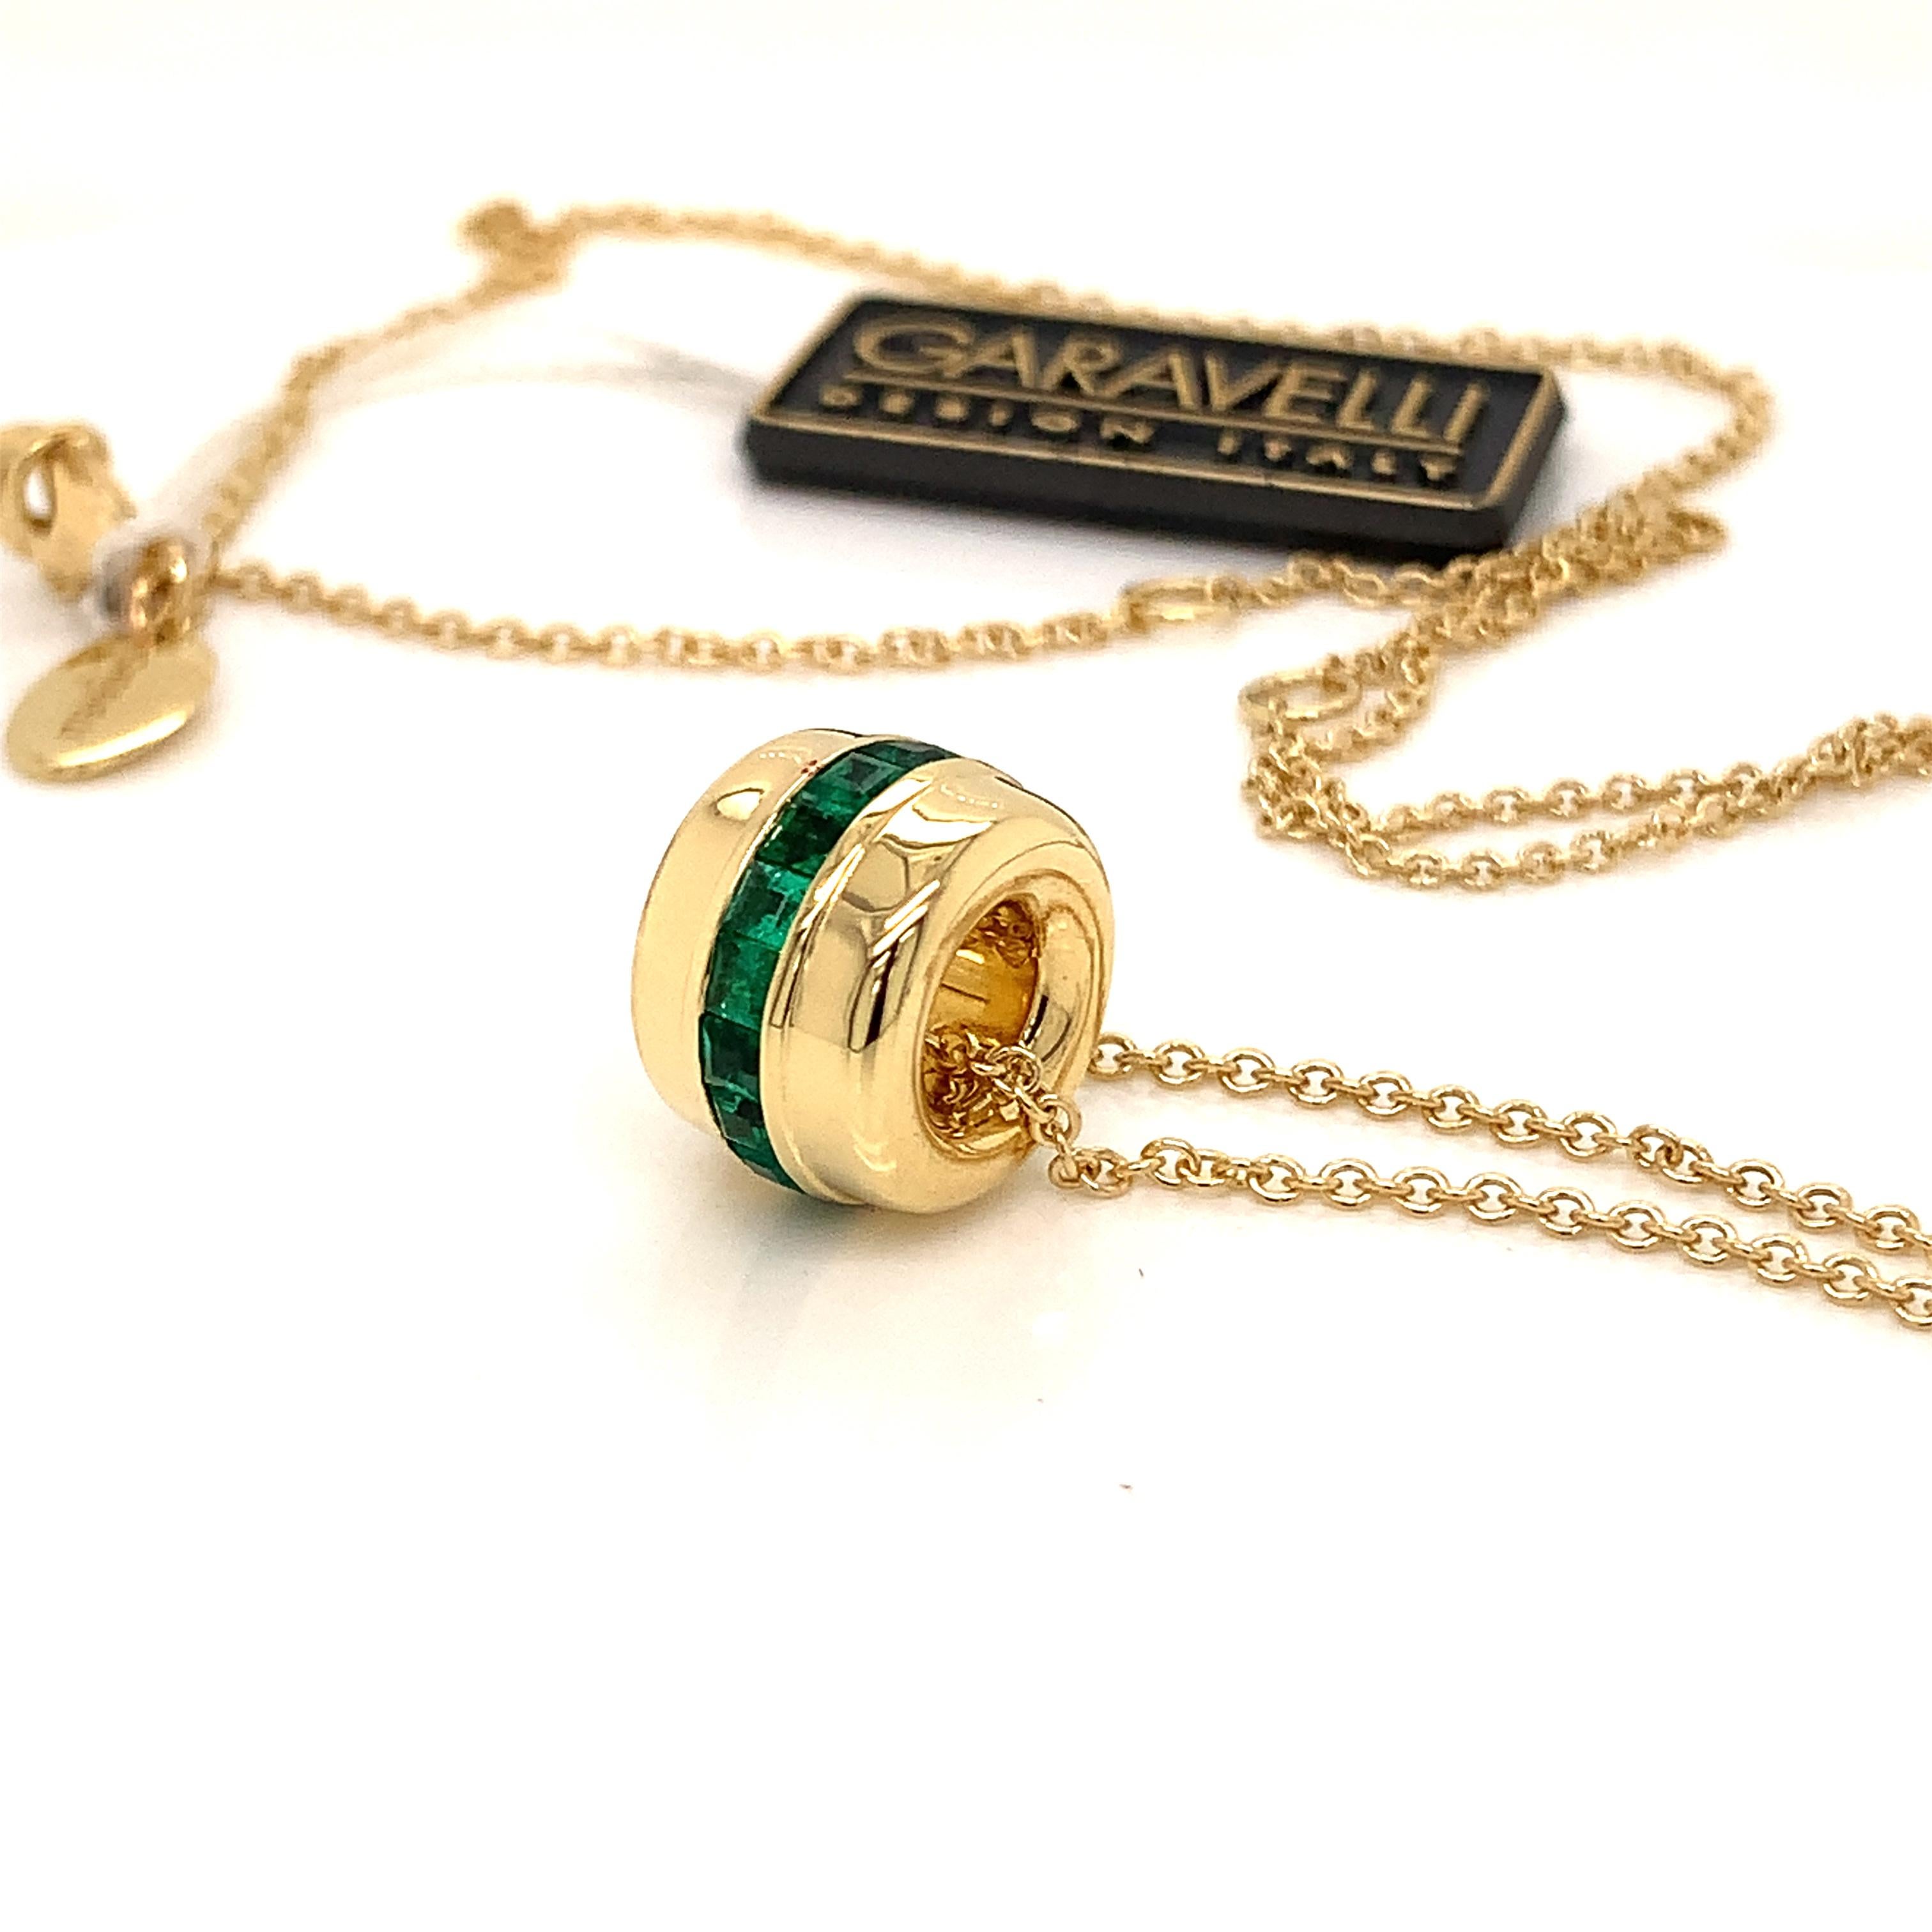 18 Karat Yellow Gold Emeralds  GARAVELLI Pendant with chain  , this pendants features seventeen perfectly square cut emeralds set in yellow gold  Matching  rings and huggie earrings also available. 
The Pendant diameter is 18mm  ;  total chain